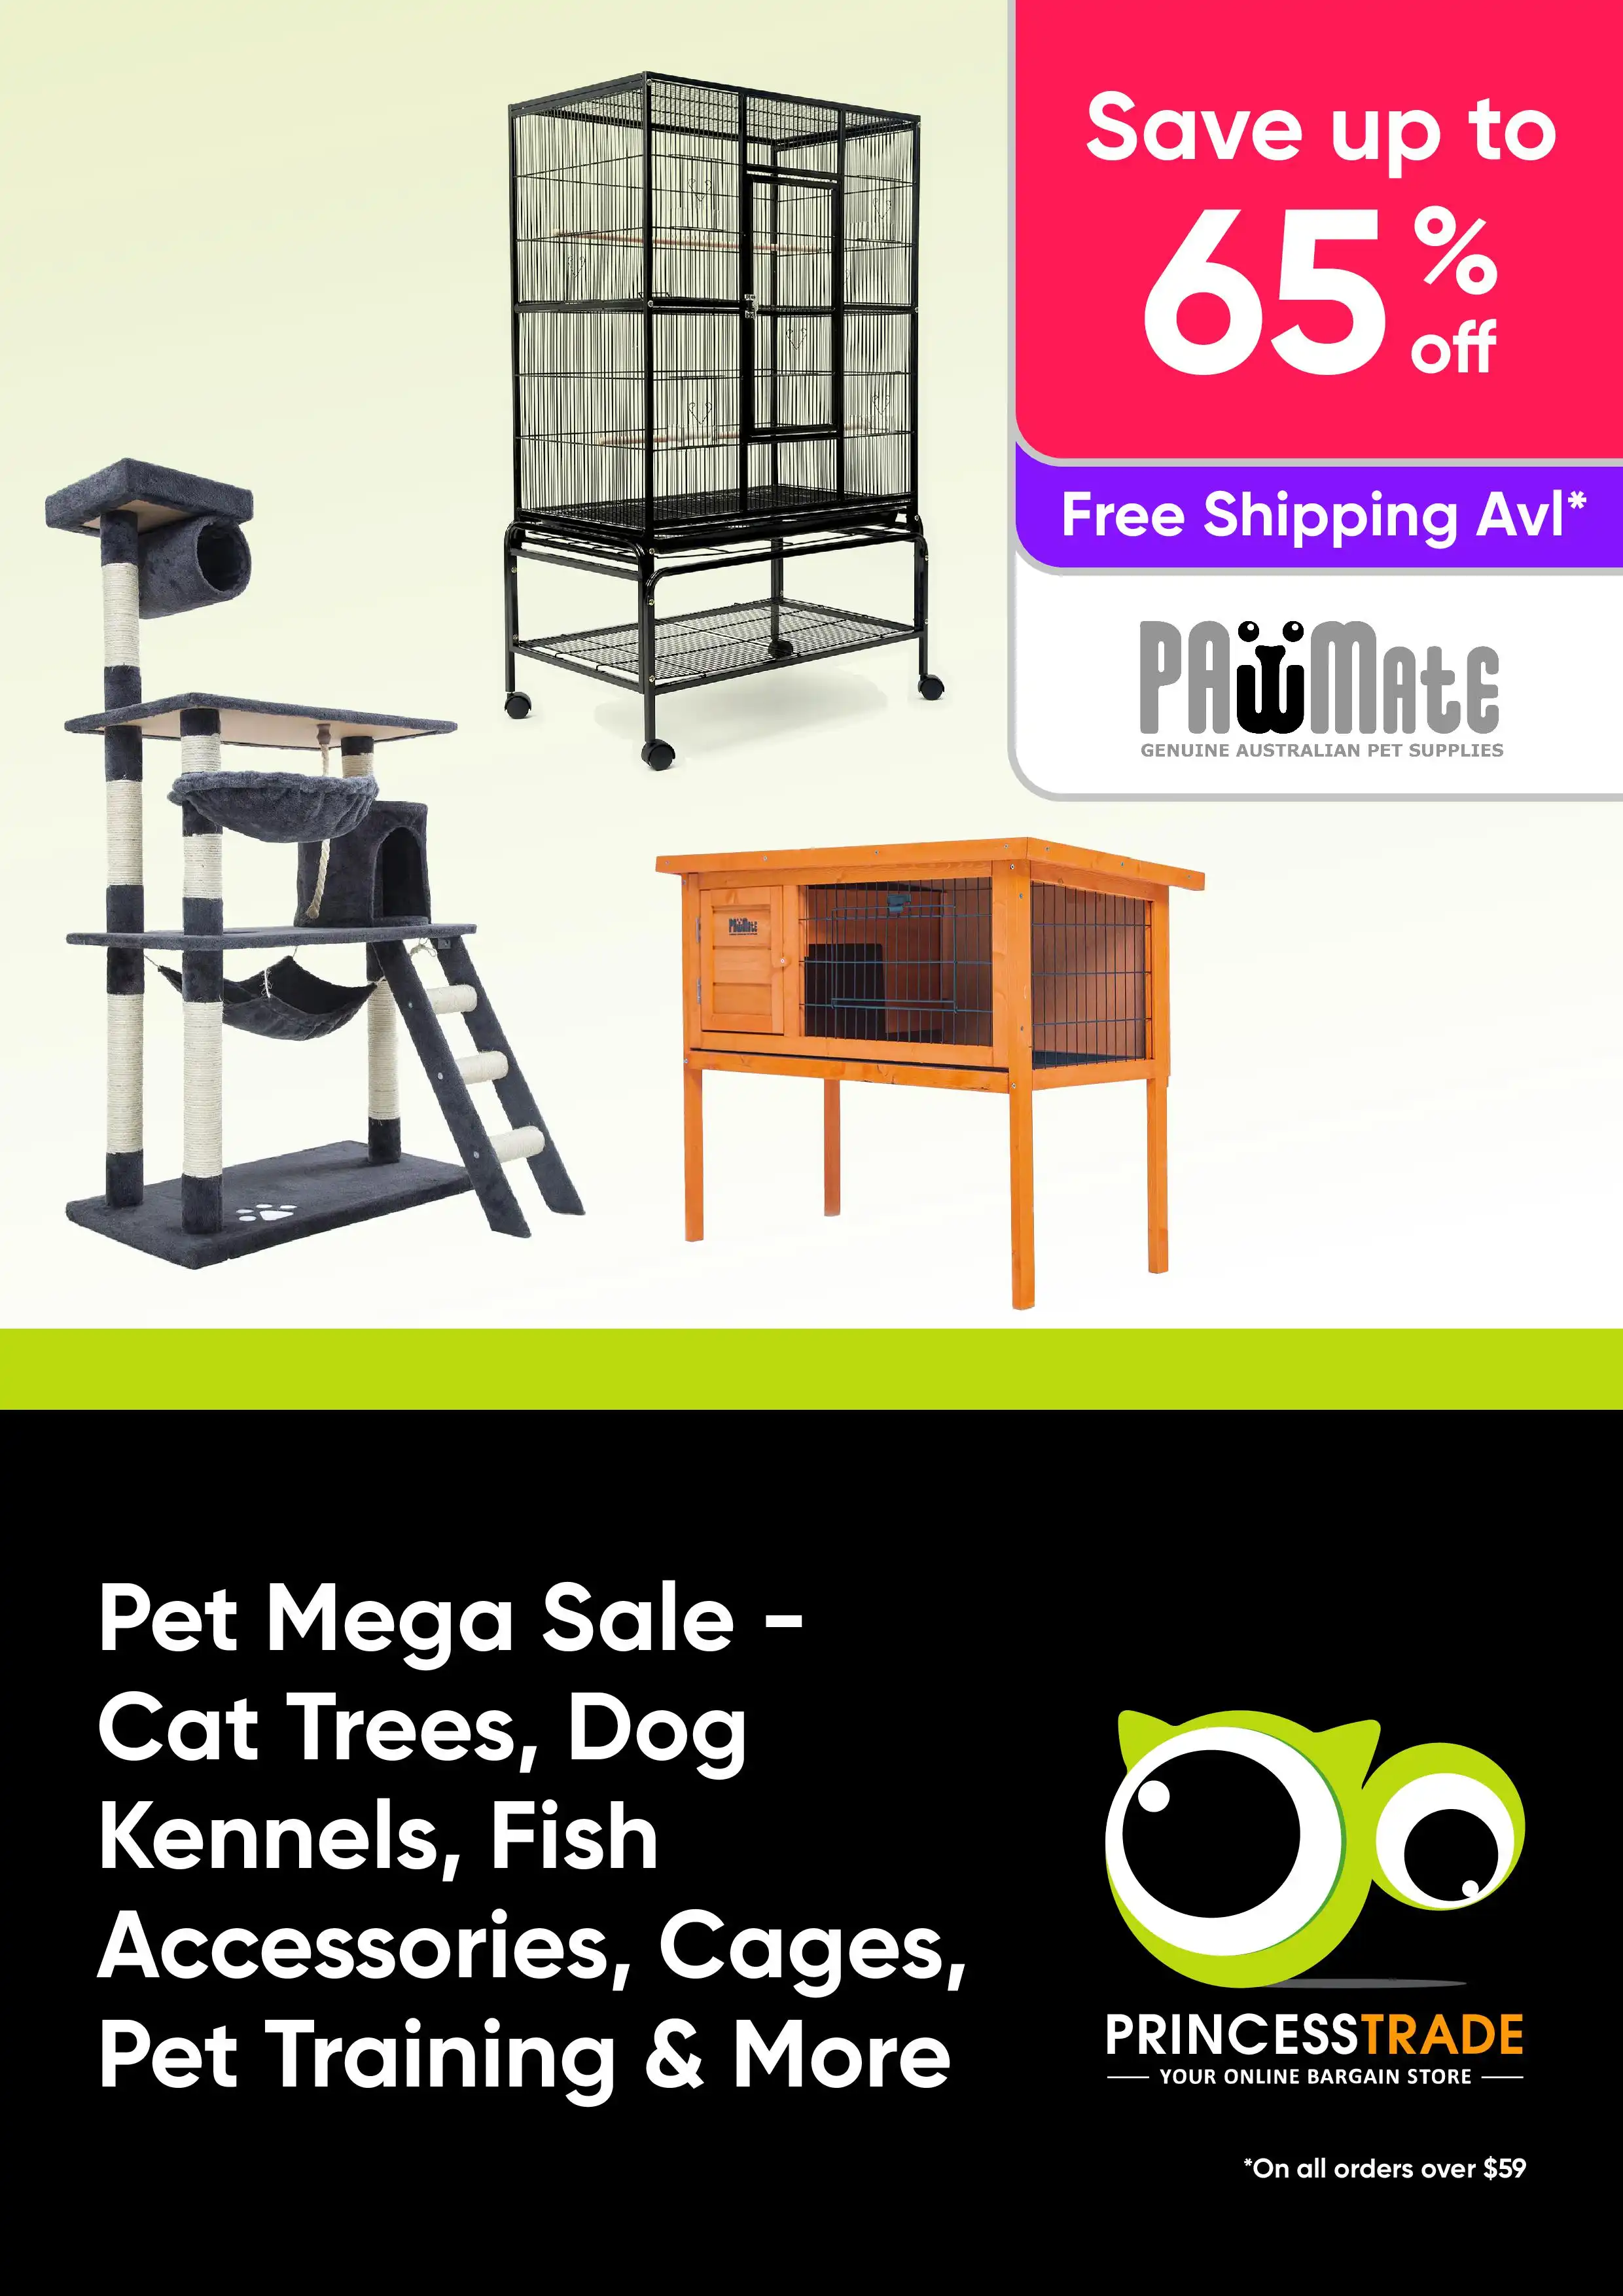 Pet Mega Sale - Save On Cat Trees, Dog Kennels, Fish Accessories, Cages, Pet Training & More